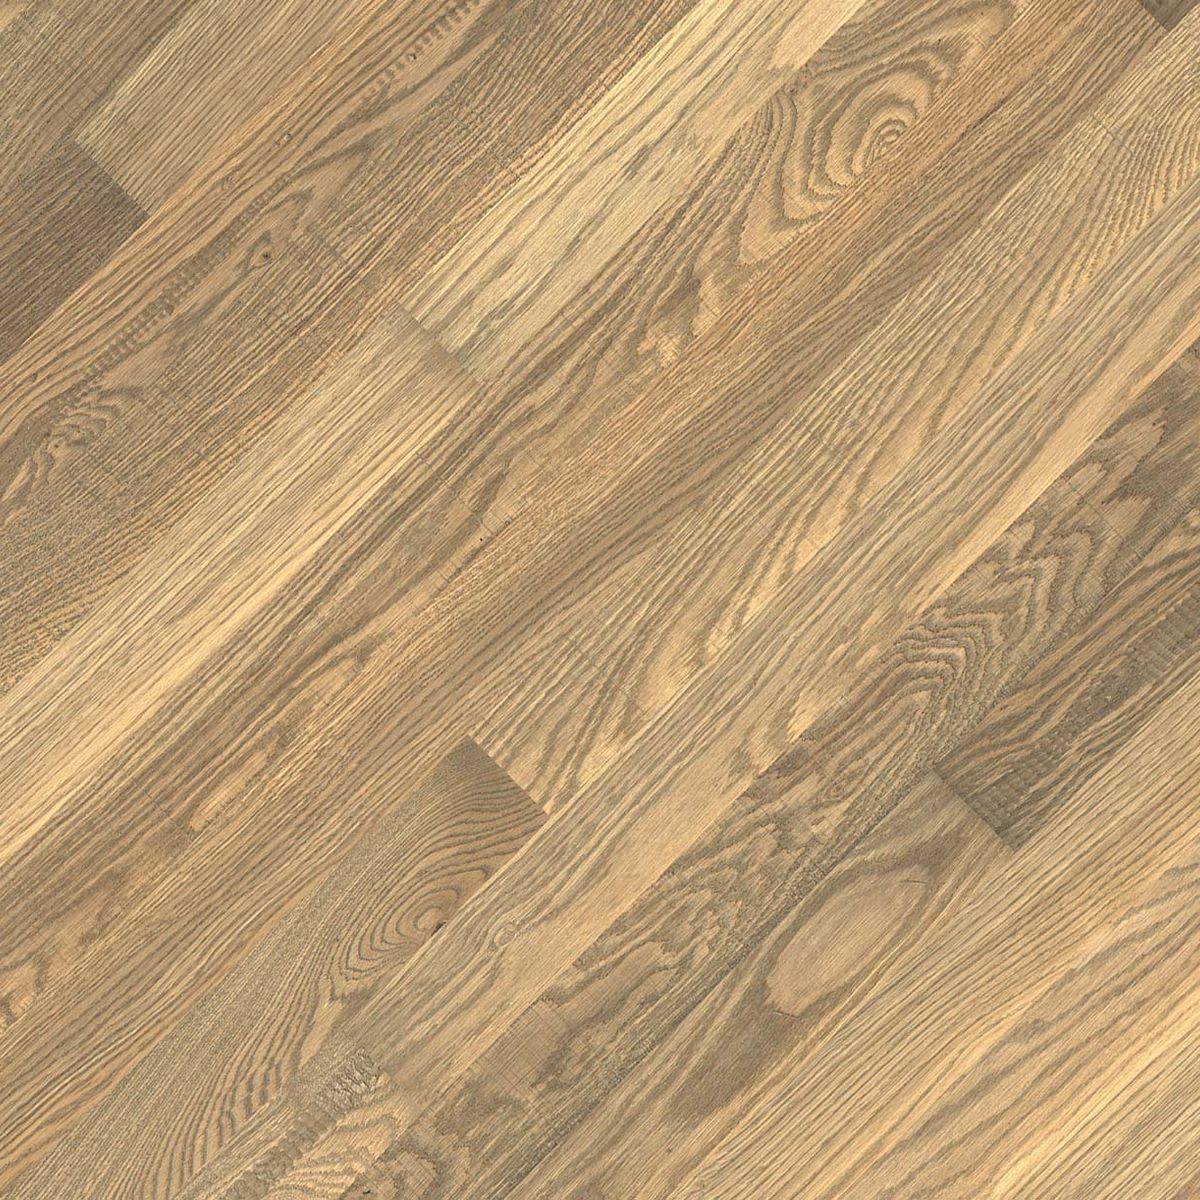 Dusty Brown Timber Flooring Archipro Nz